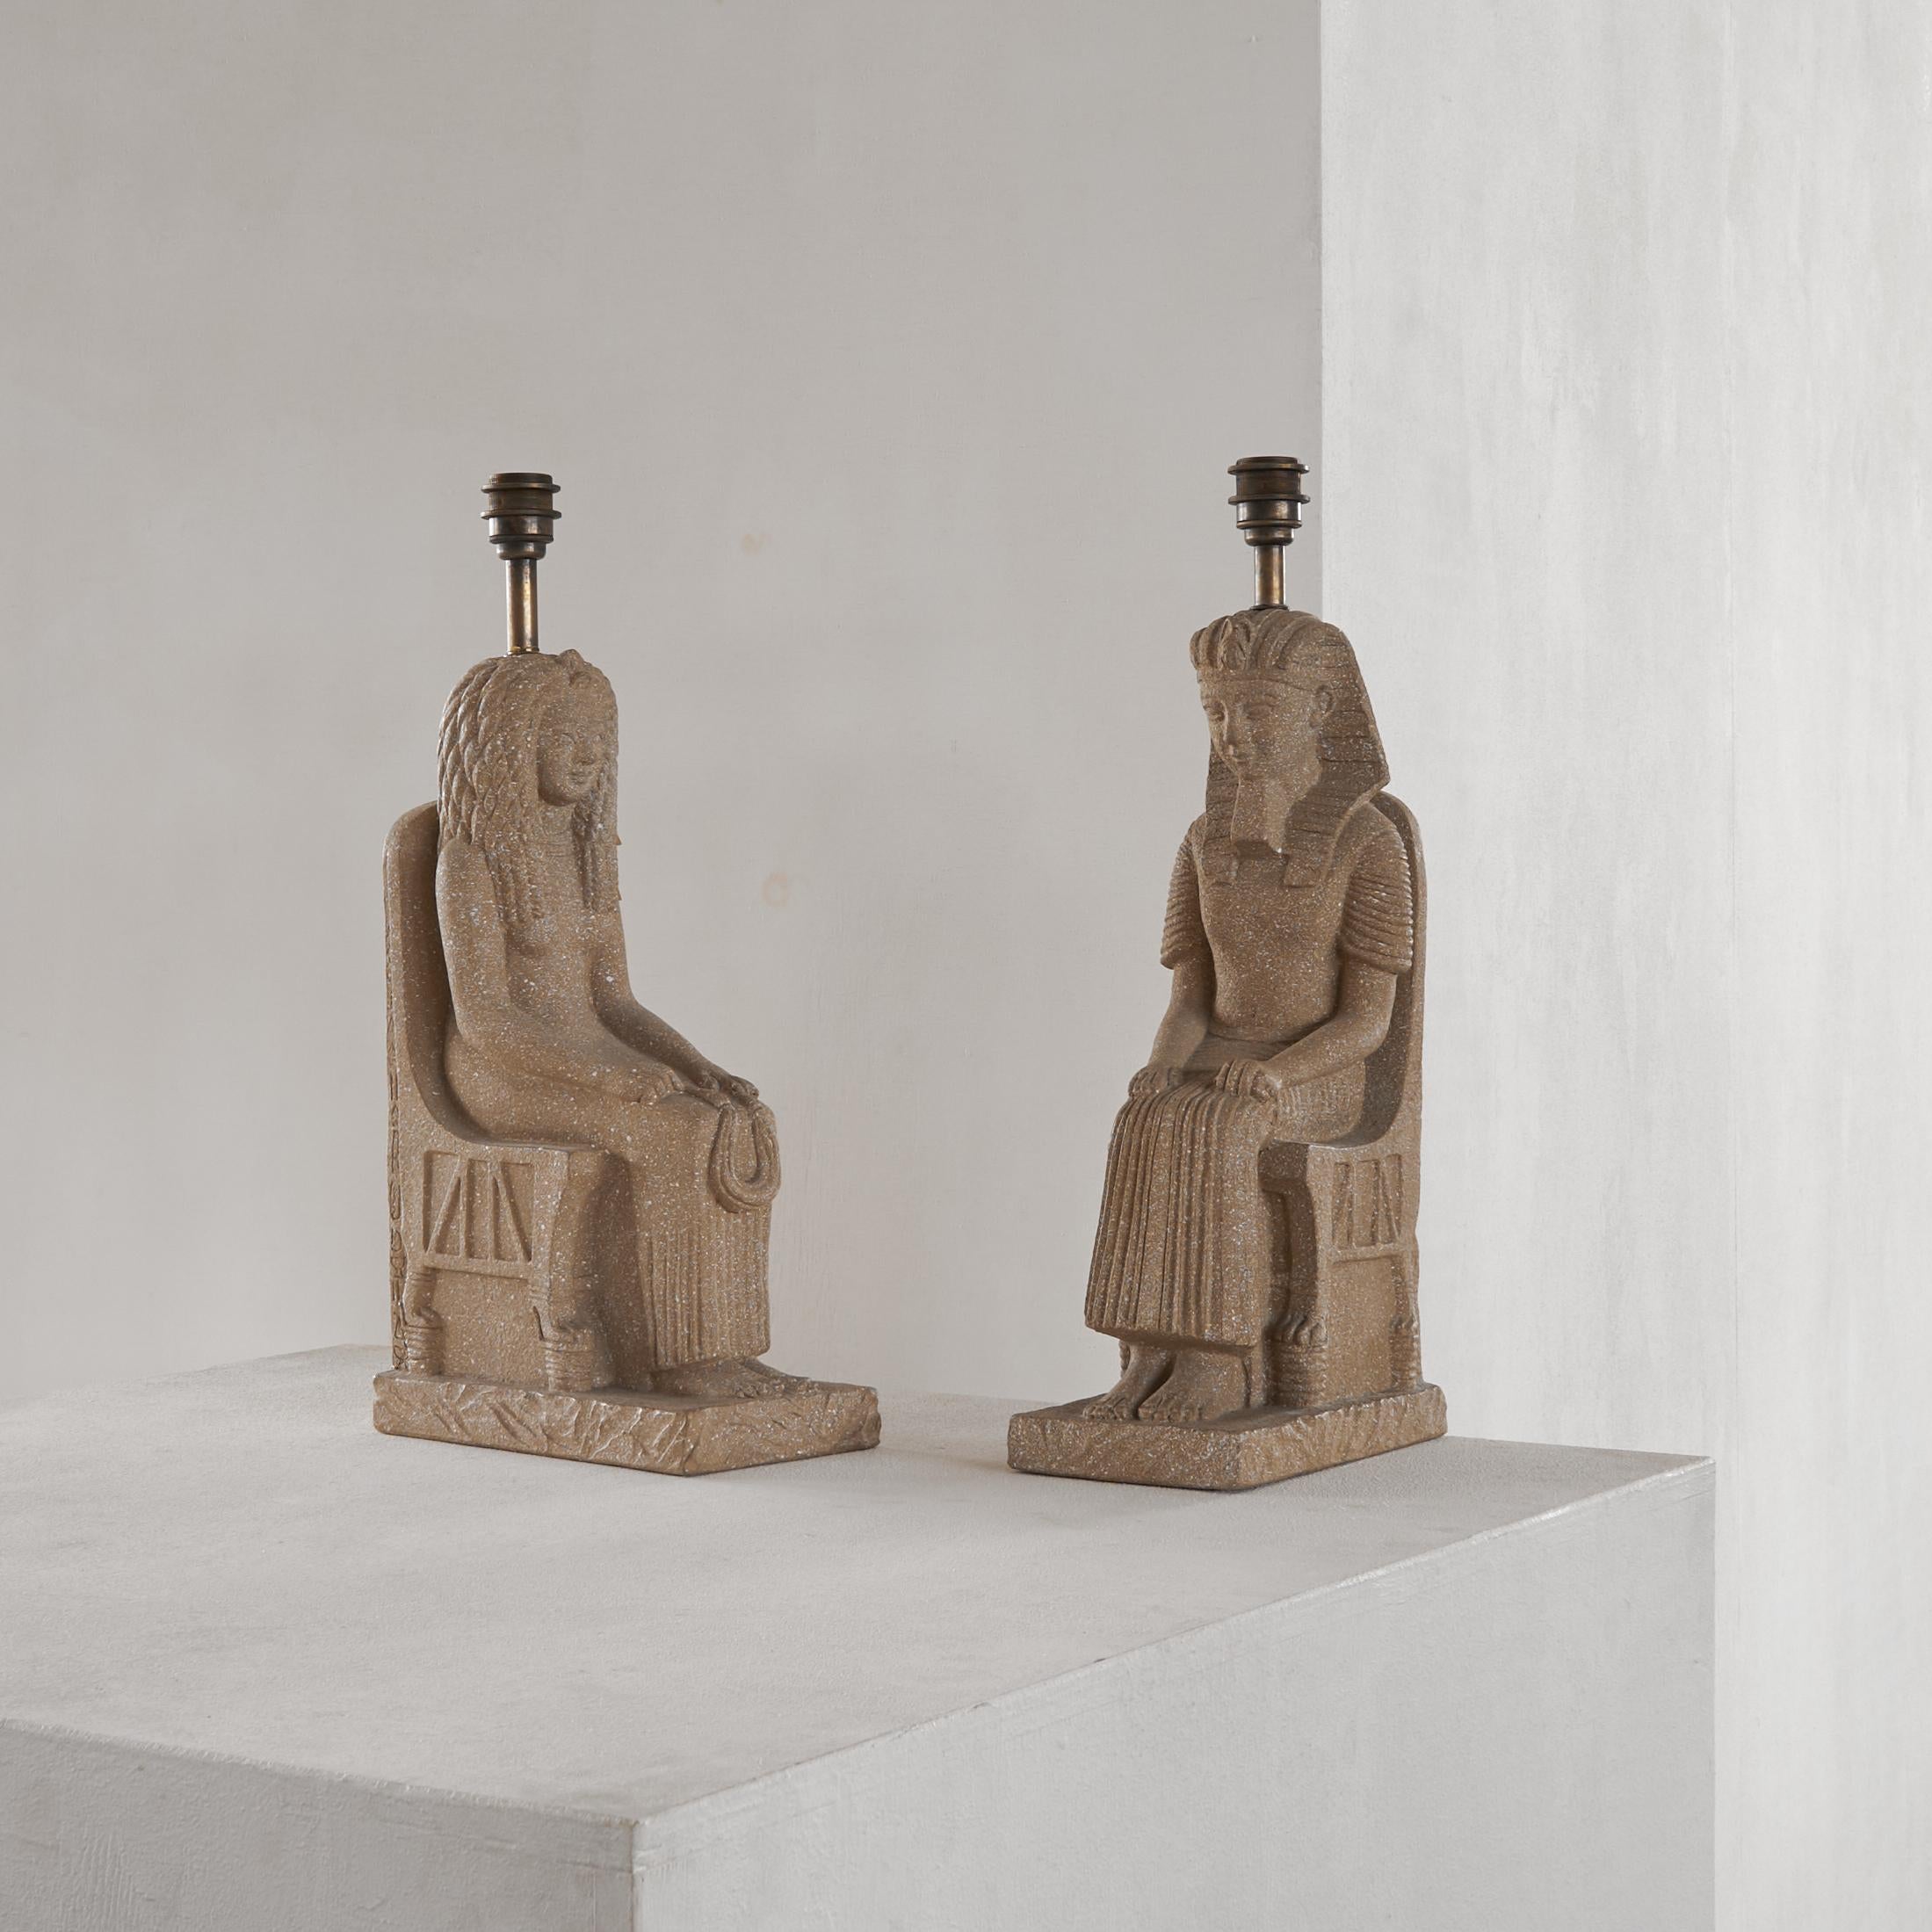 Zaccagnini Florence Pair of Monumental Pharaoh Ceramic Table Lamps Italy 1970s For Sale 4